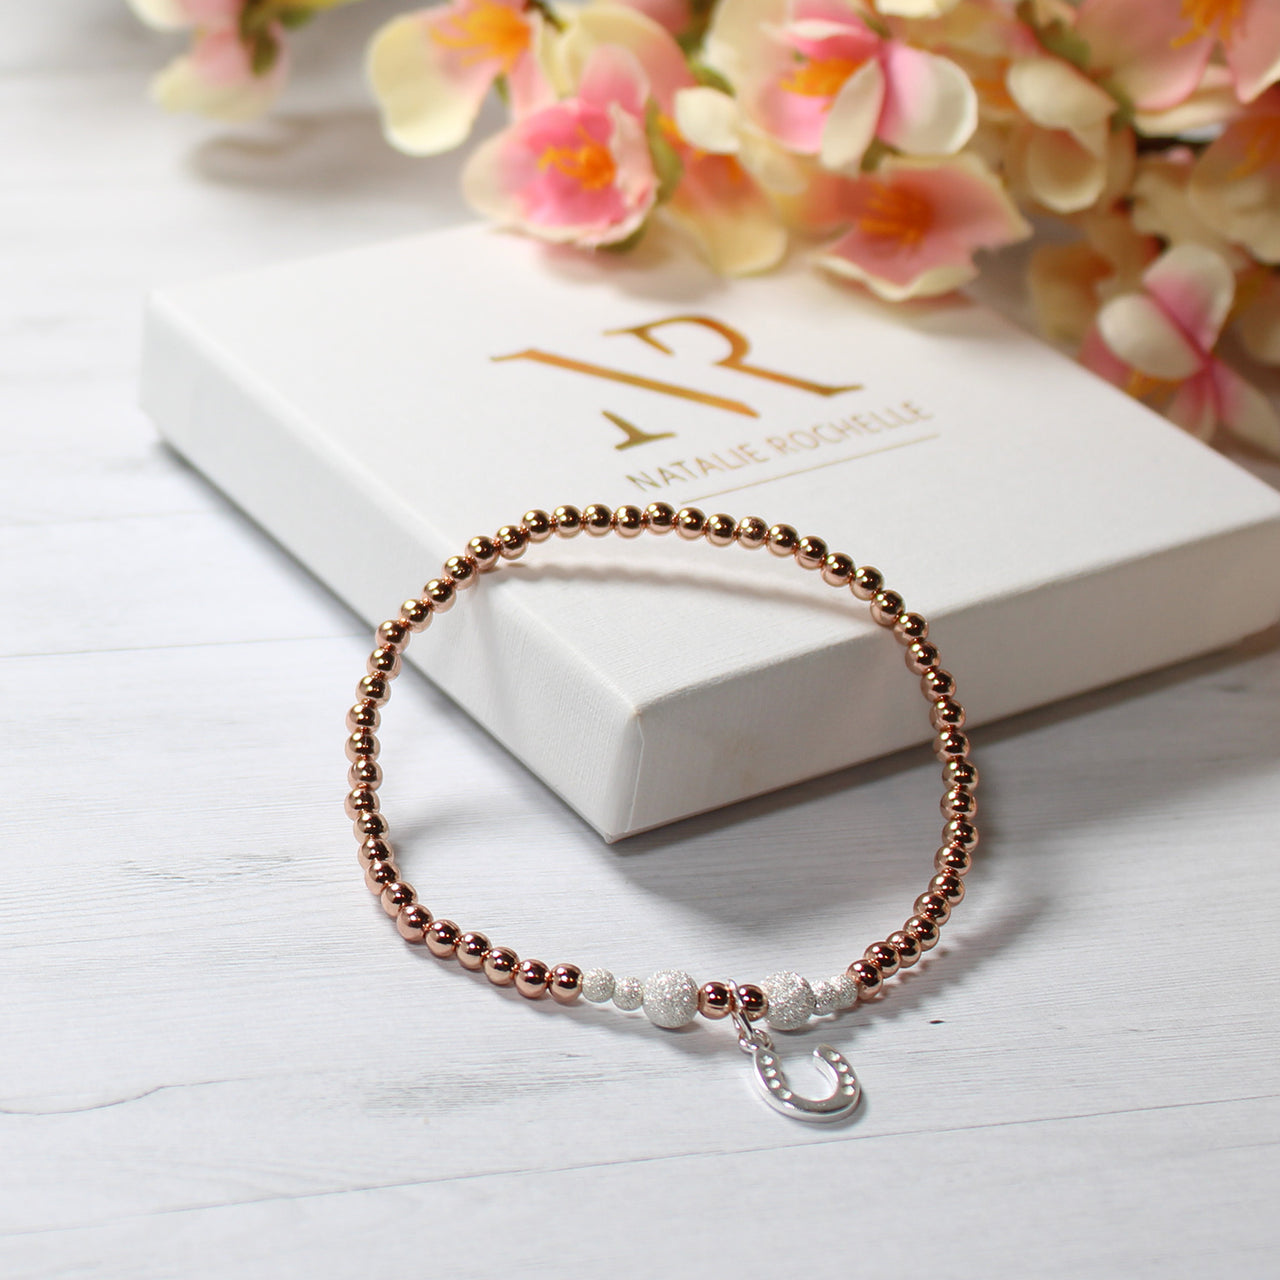 Rose Gold beaded Bracelet with sterling silver horseshoe charm